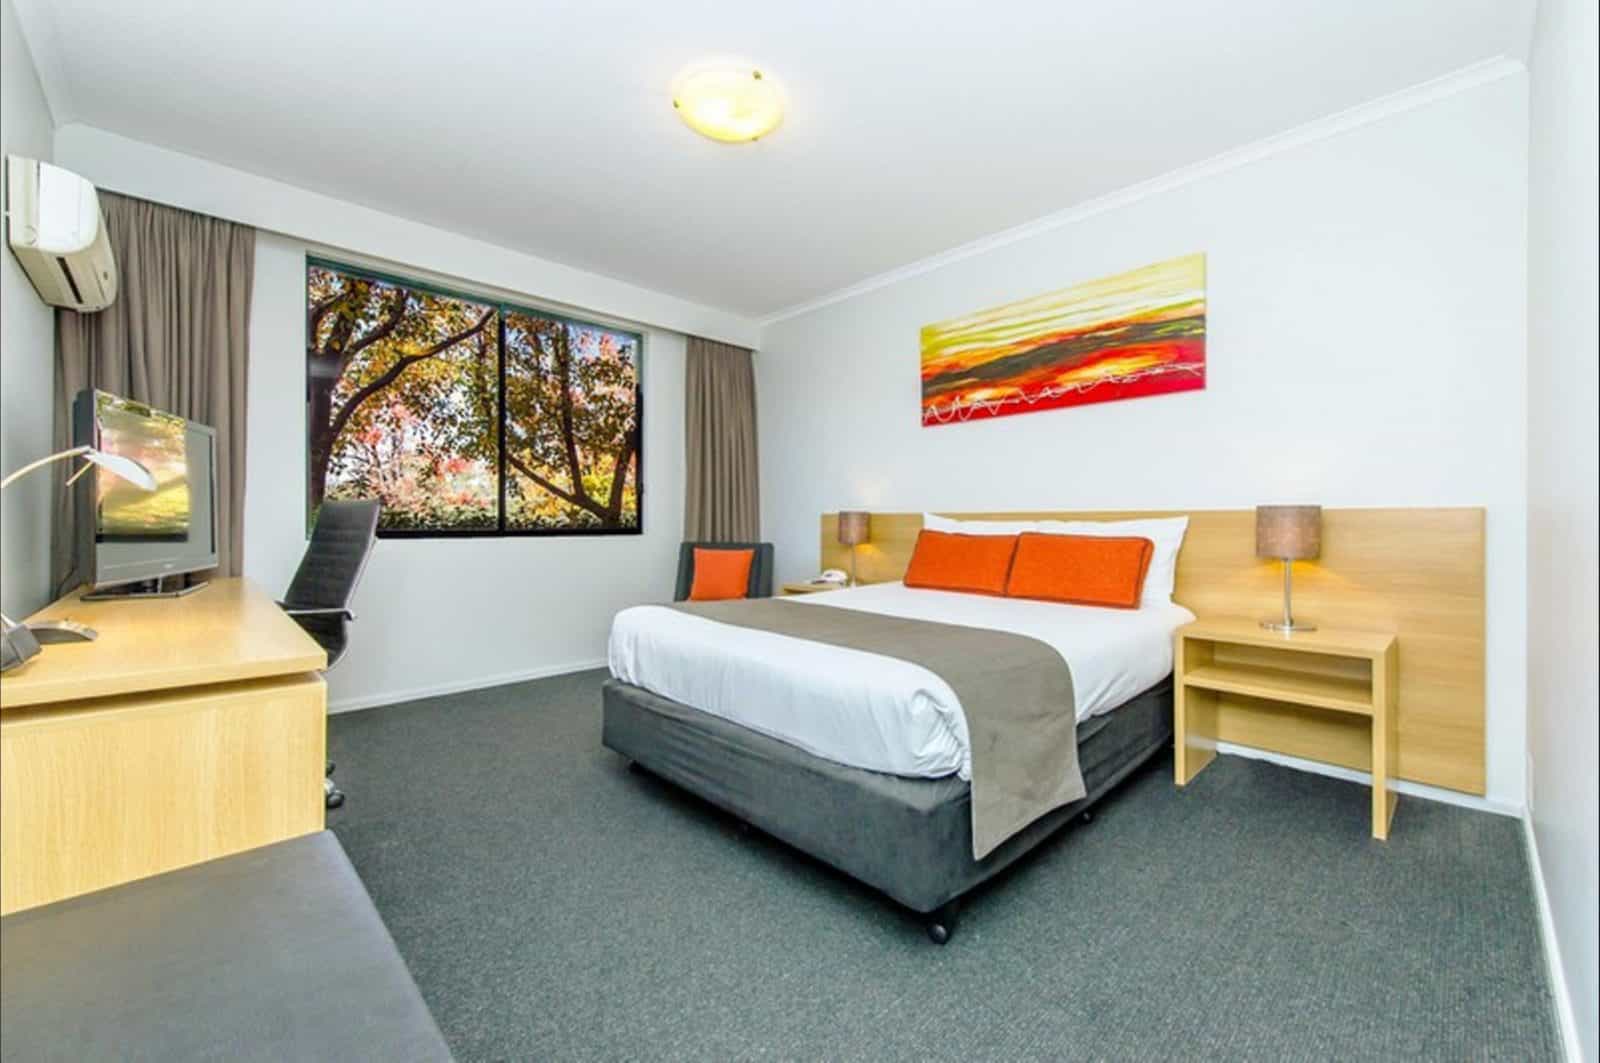 Deluxe Room interior with views of tree tops